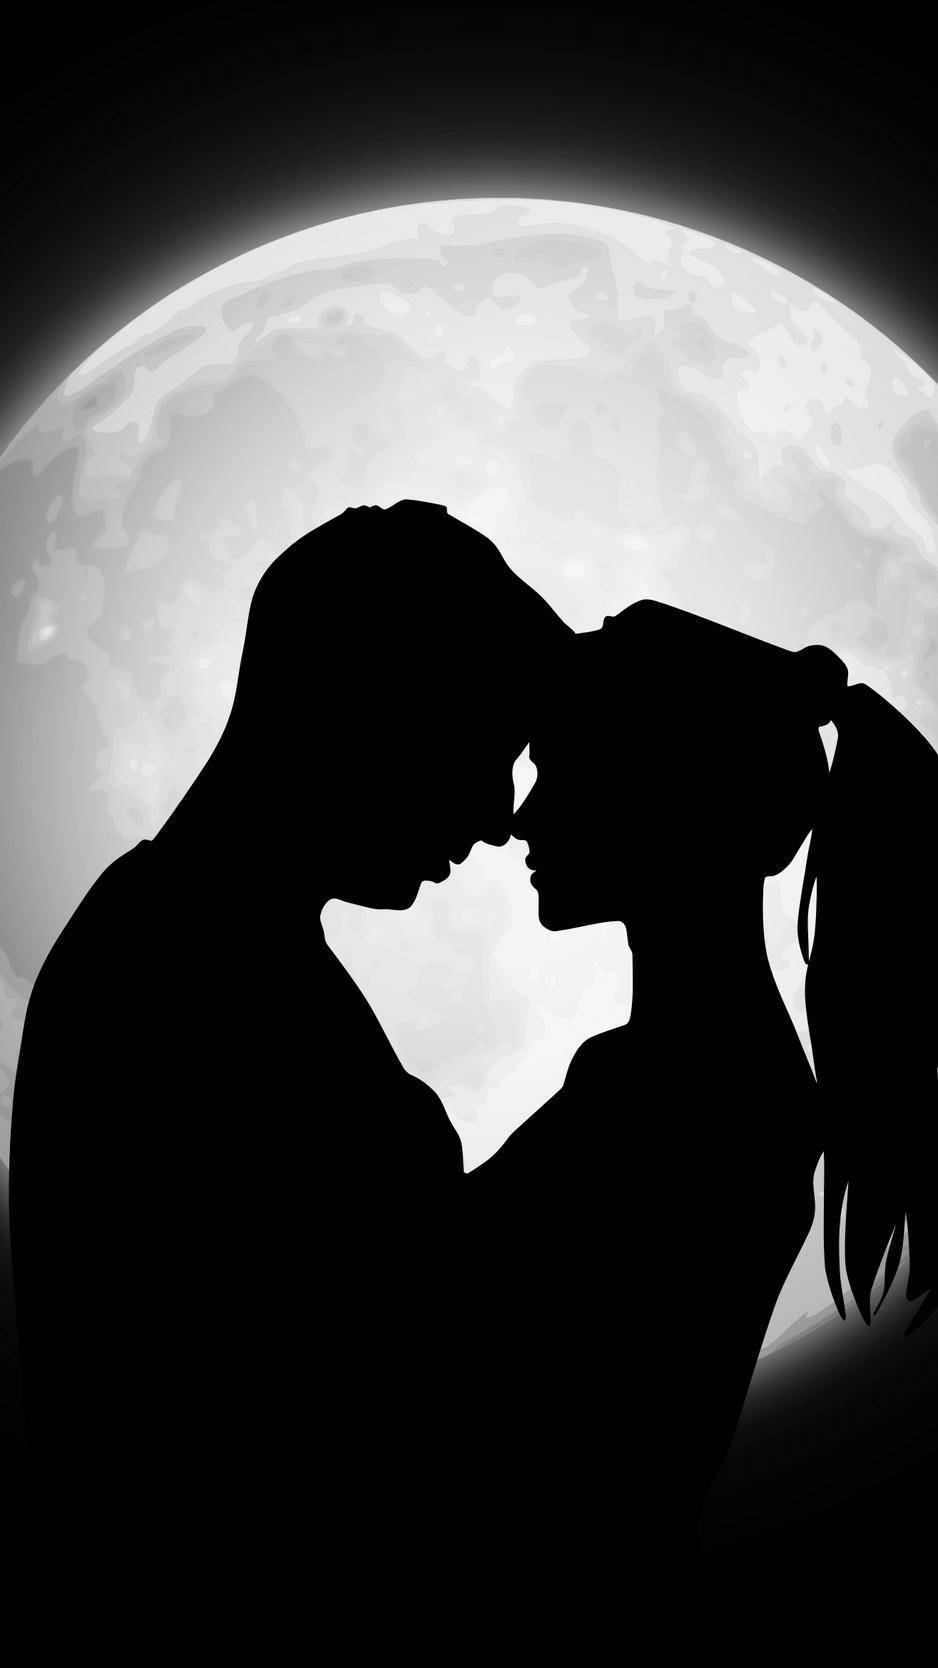 Download Couple Moon Silhouette Love Iphone Wallpaper | Wallpapers.com